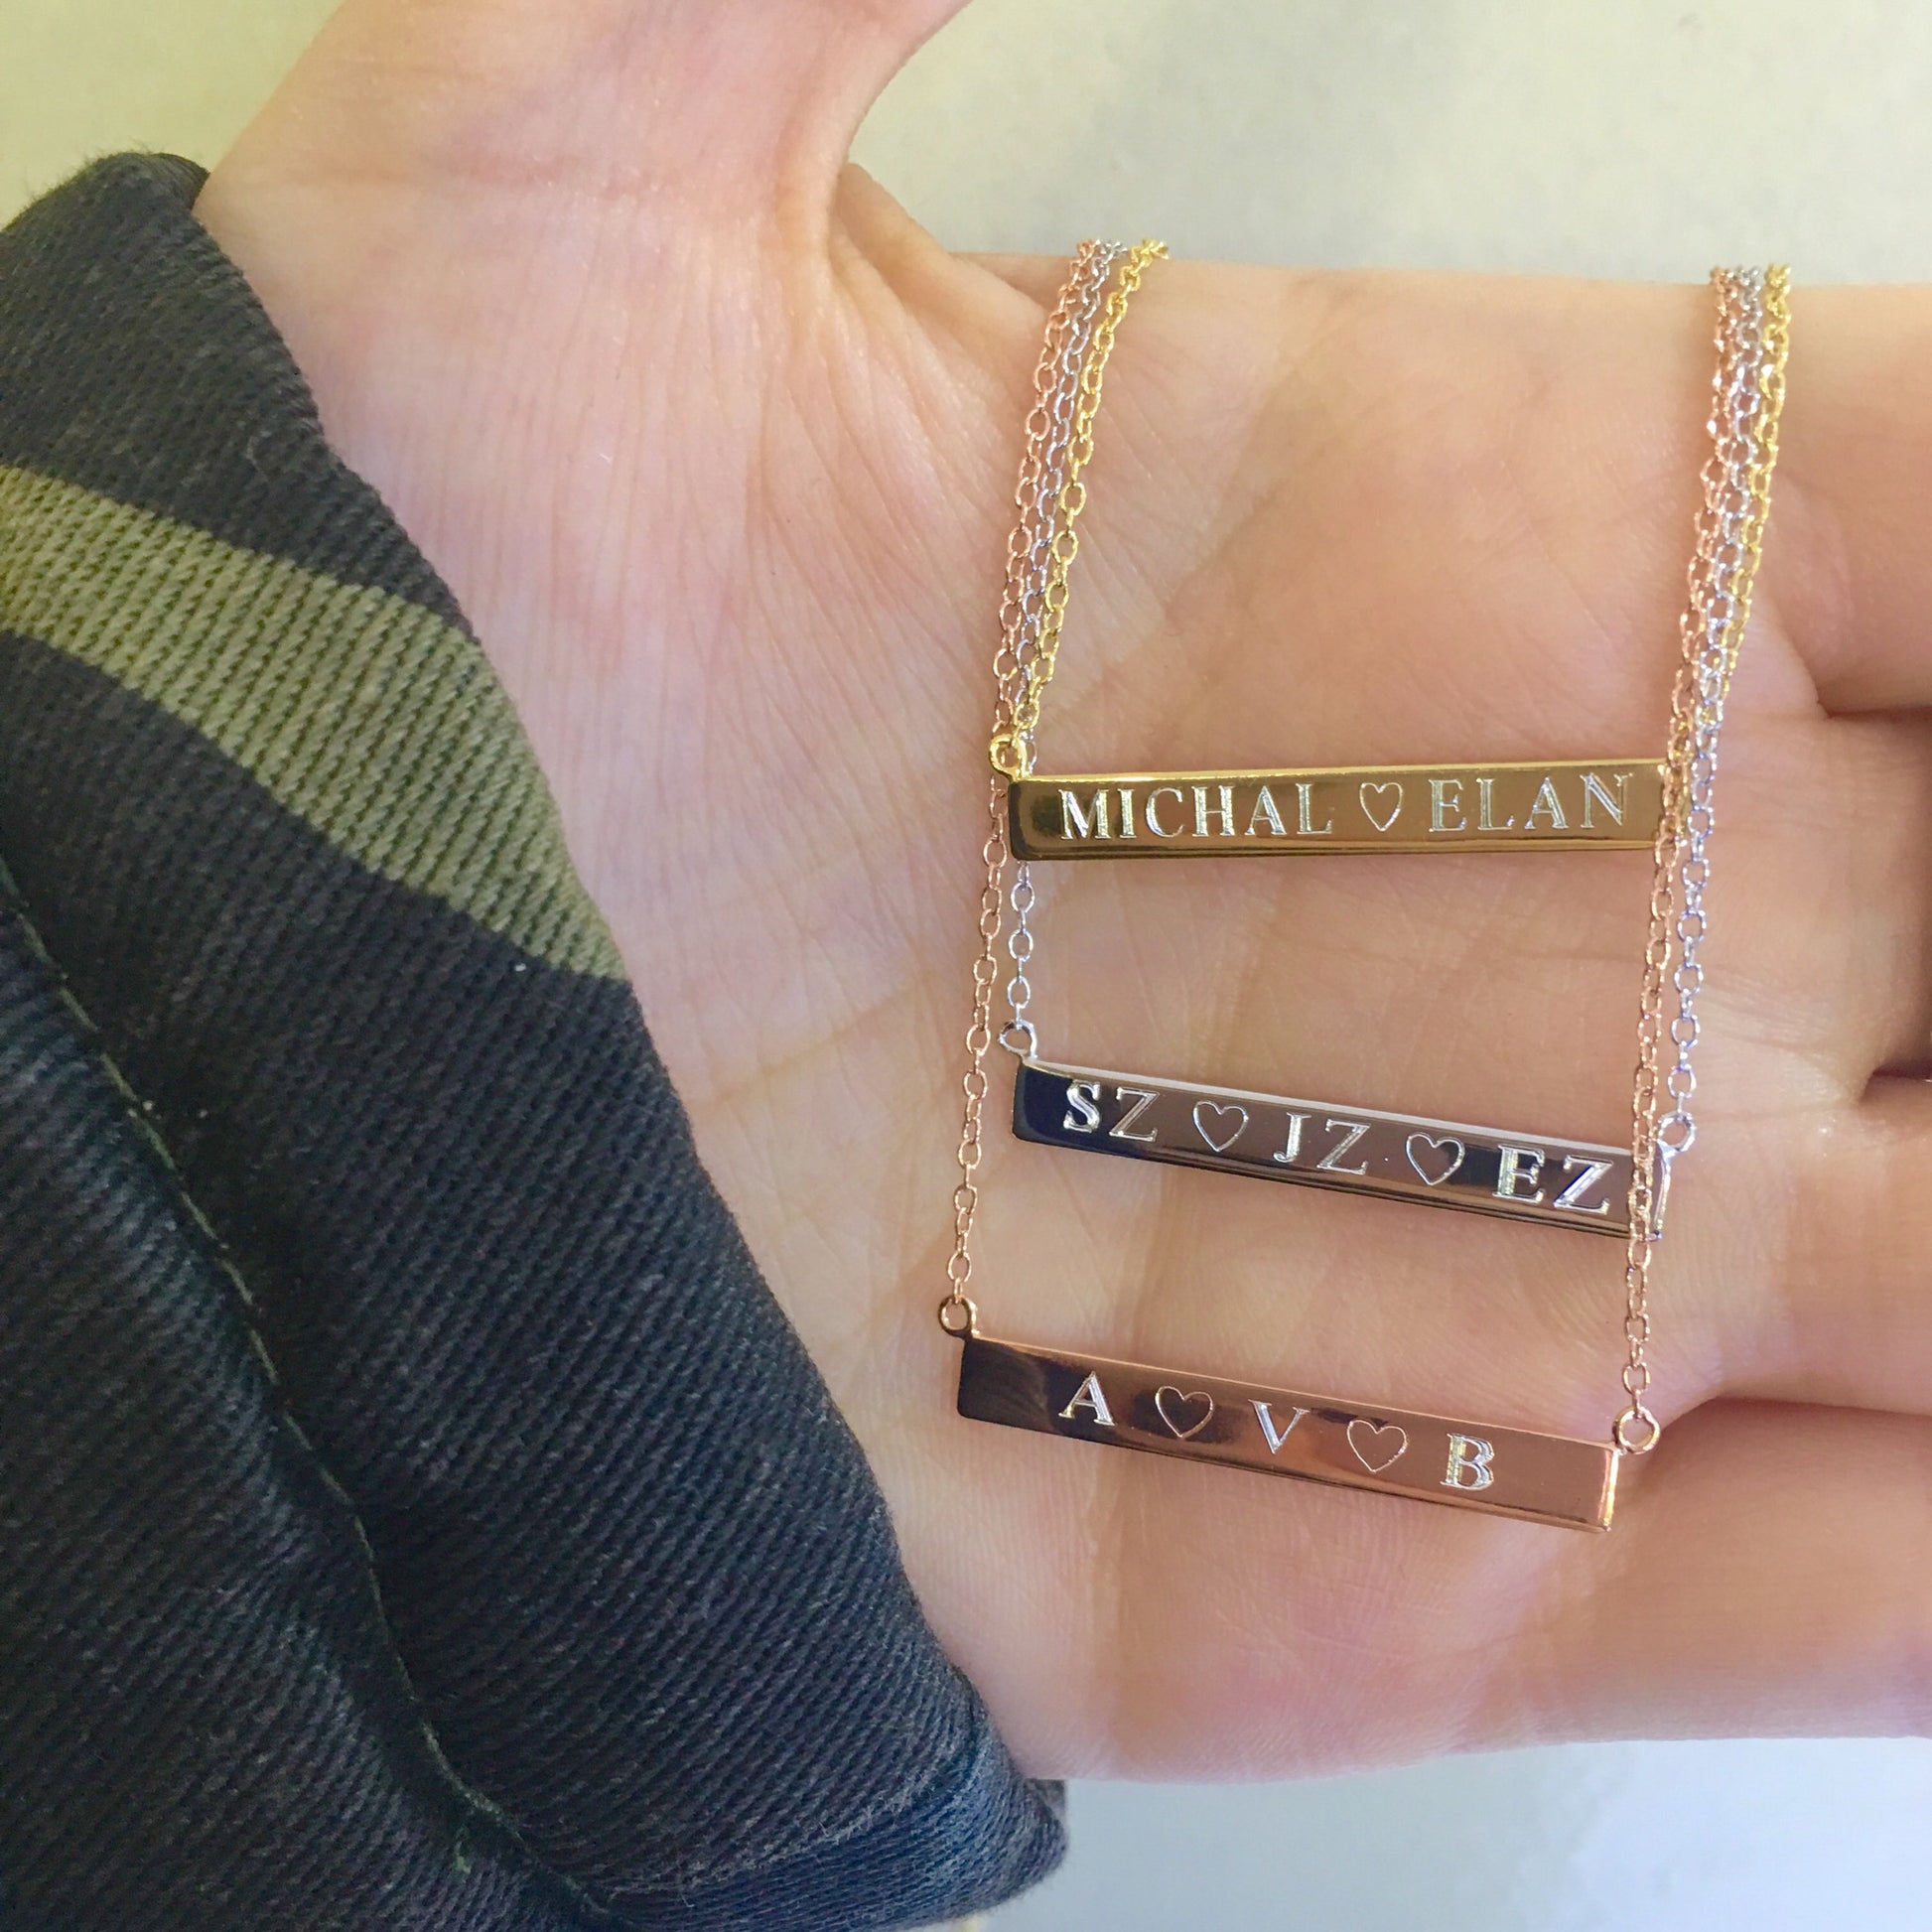 Standard Bar Engraved Nameplate Necklace - Retail Therapy Jewelry